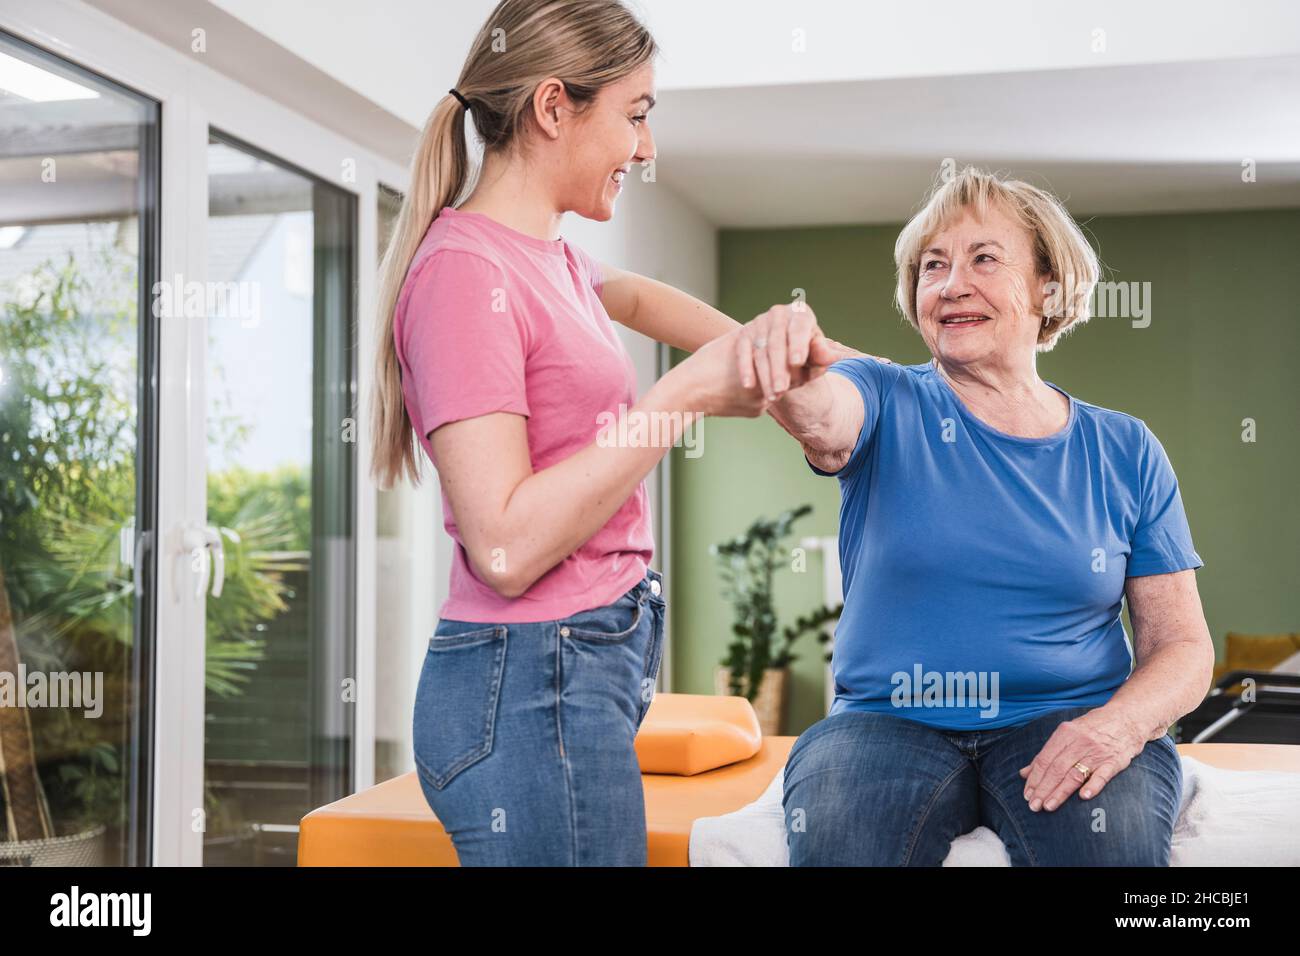 Smiling physical therapist supporting woman to exercise at home Stock Photo